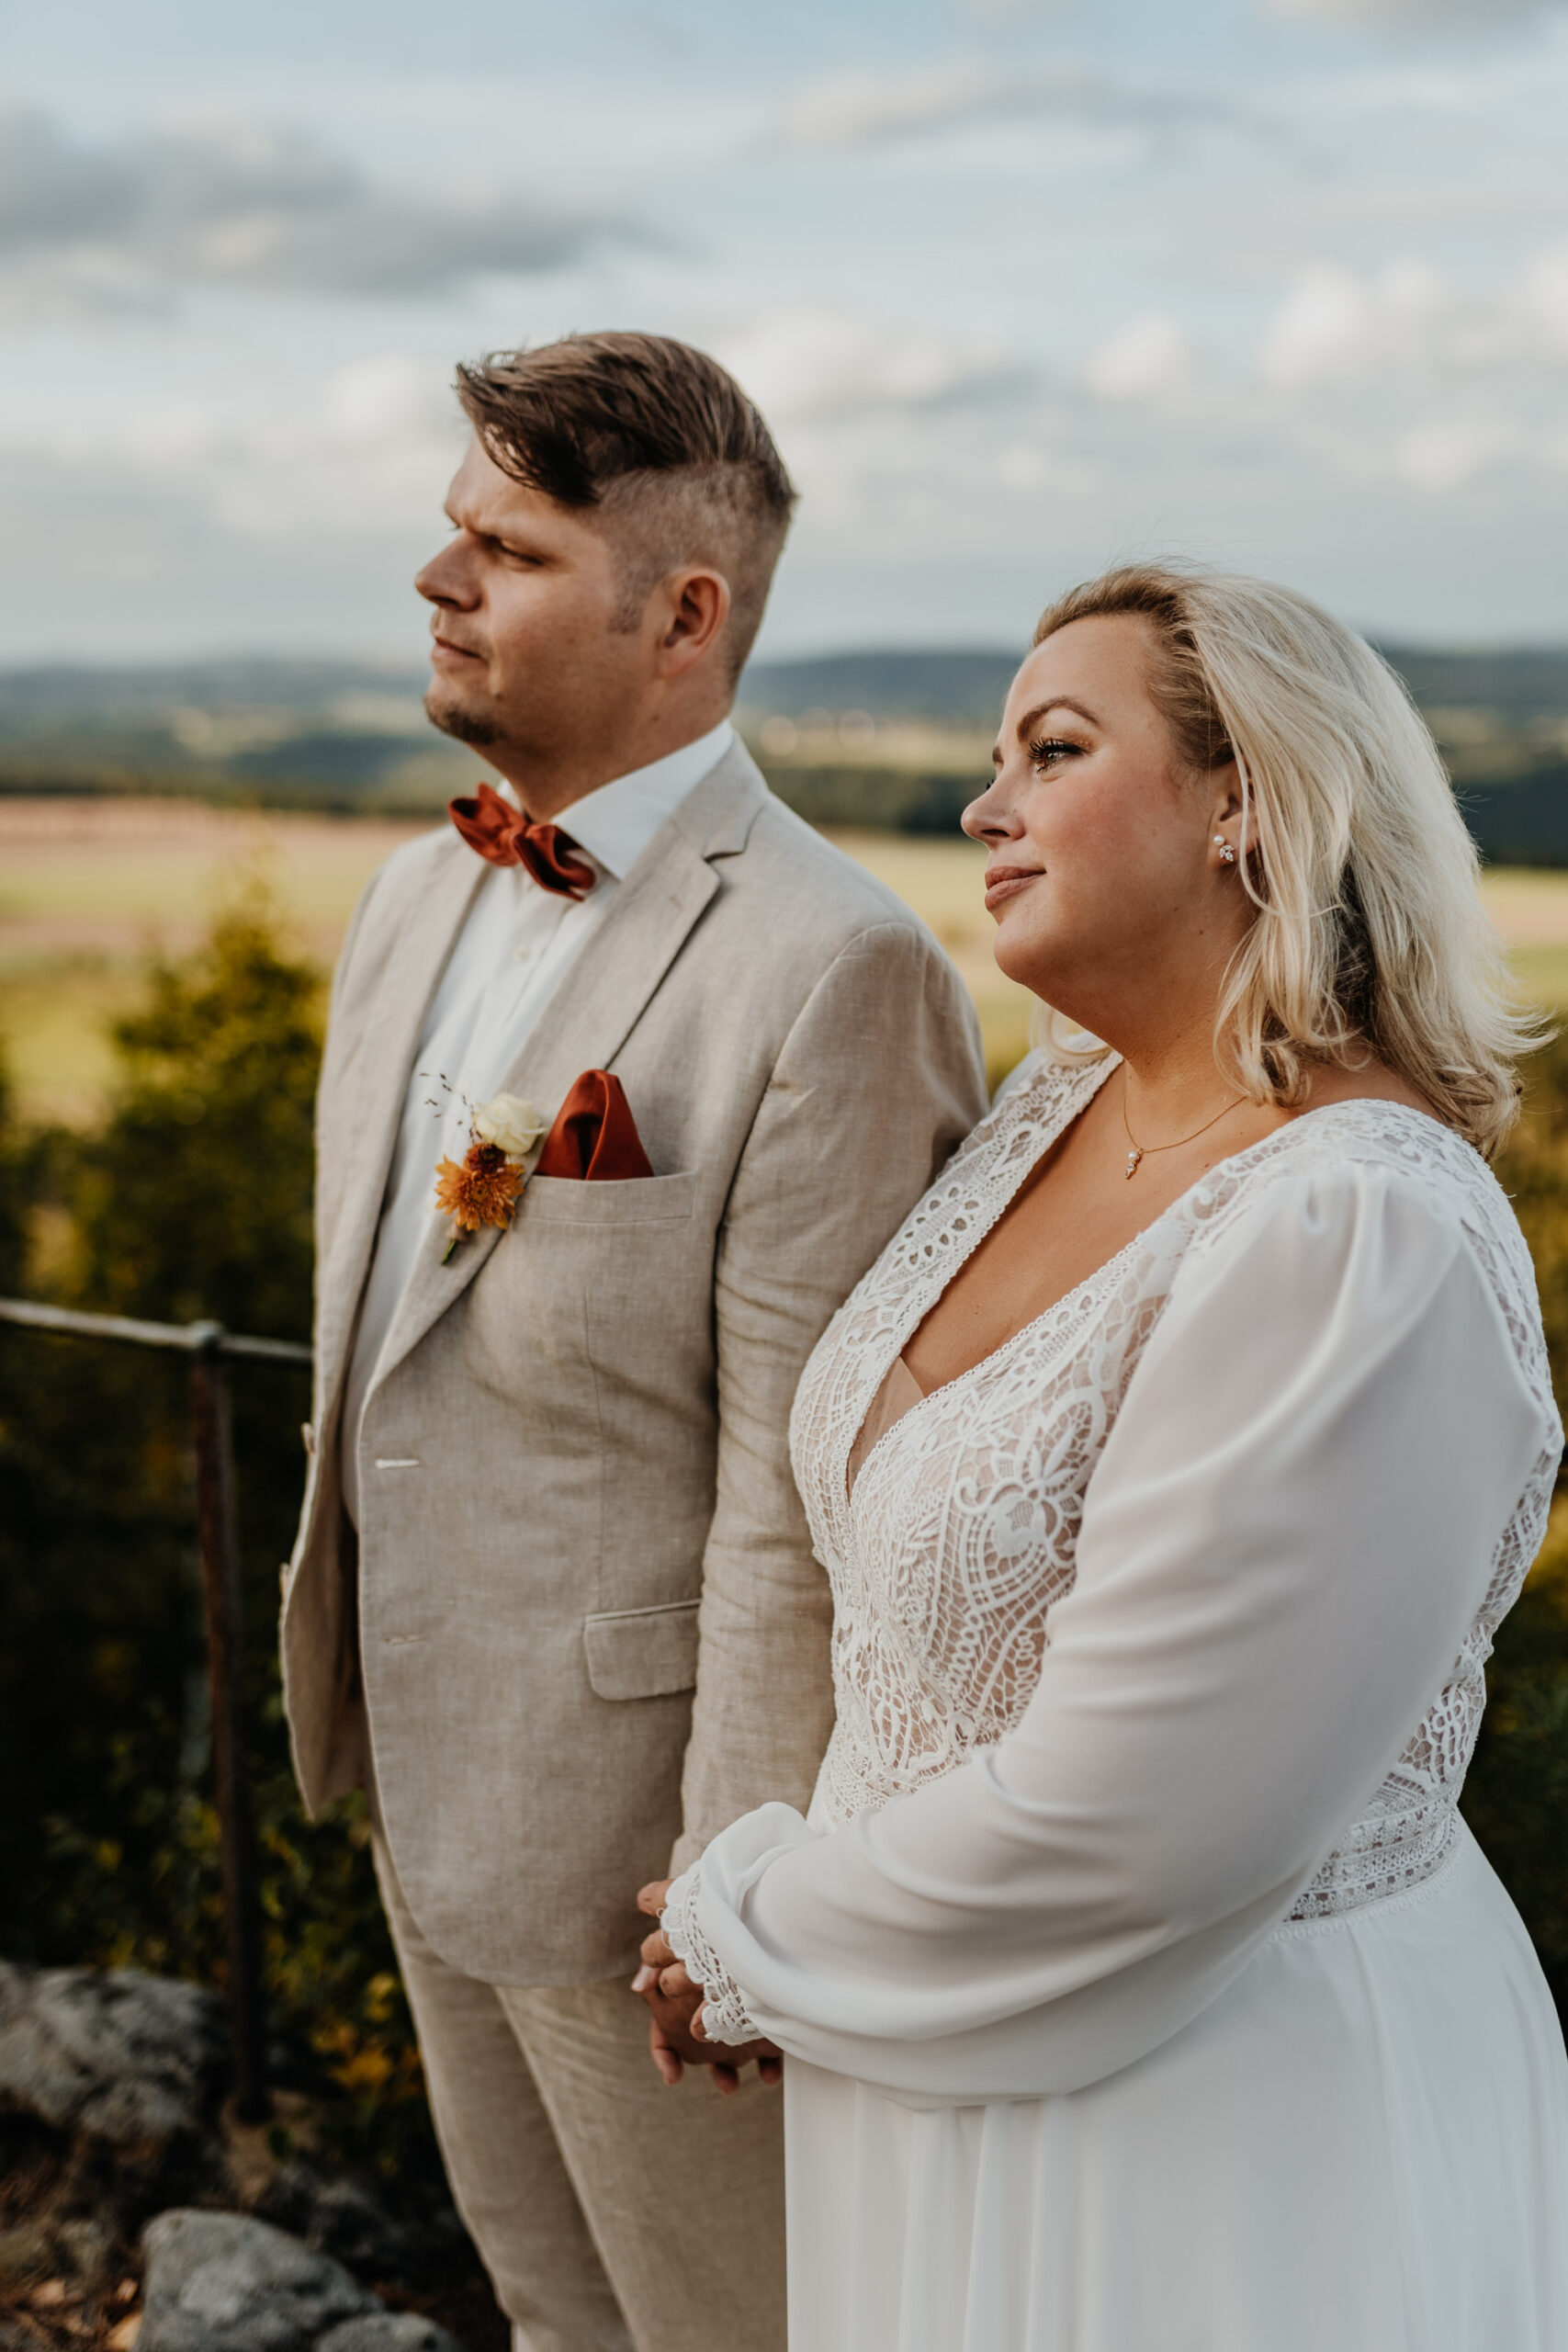 Different Germany elopement timeline examples to inspire your planning